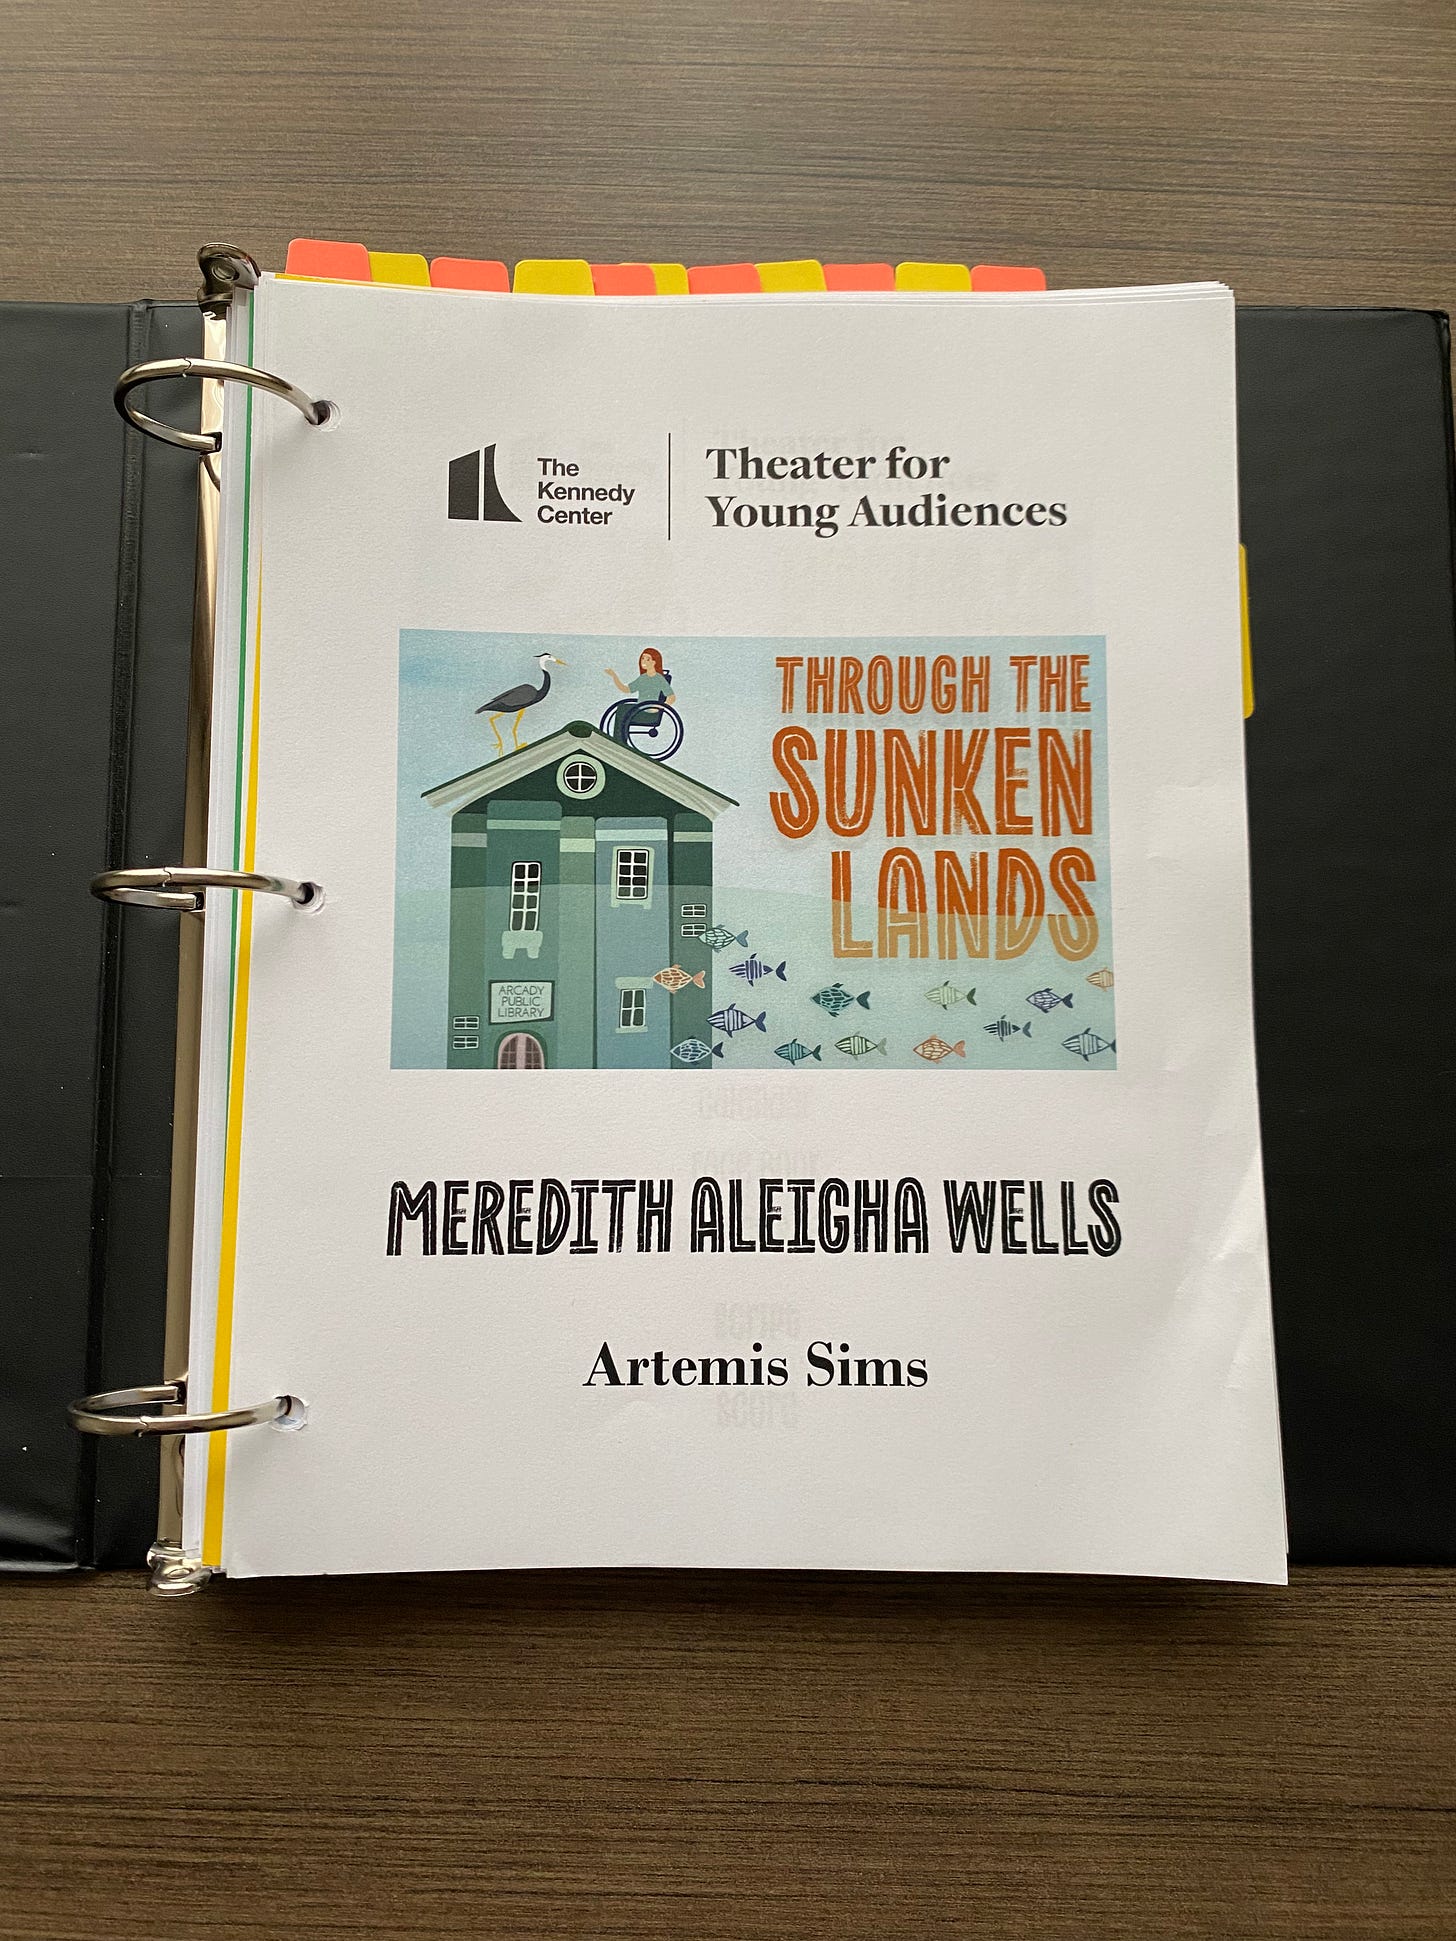 picture of script with text that reads the kennedy center theater for young audiences through the sunken lands meredith aleigha wells artemis sims